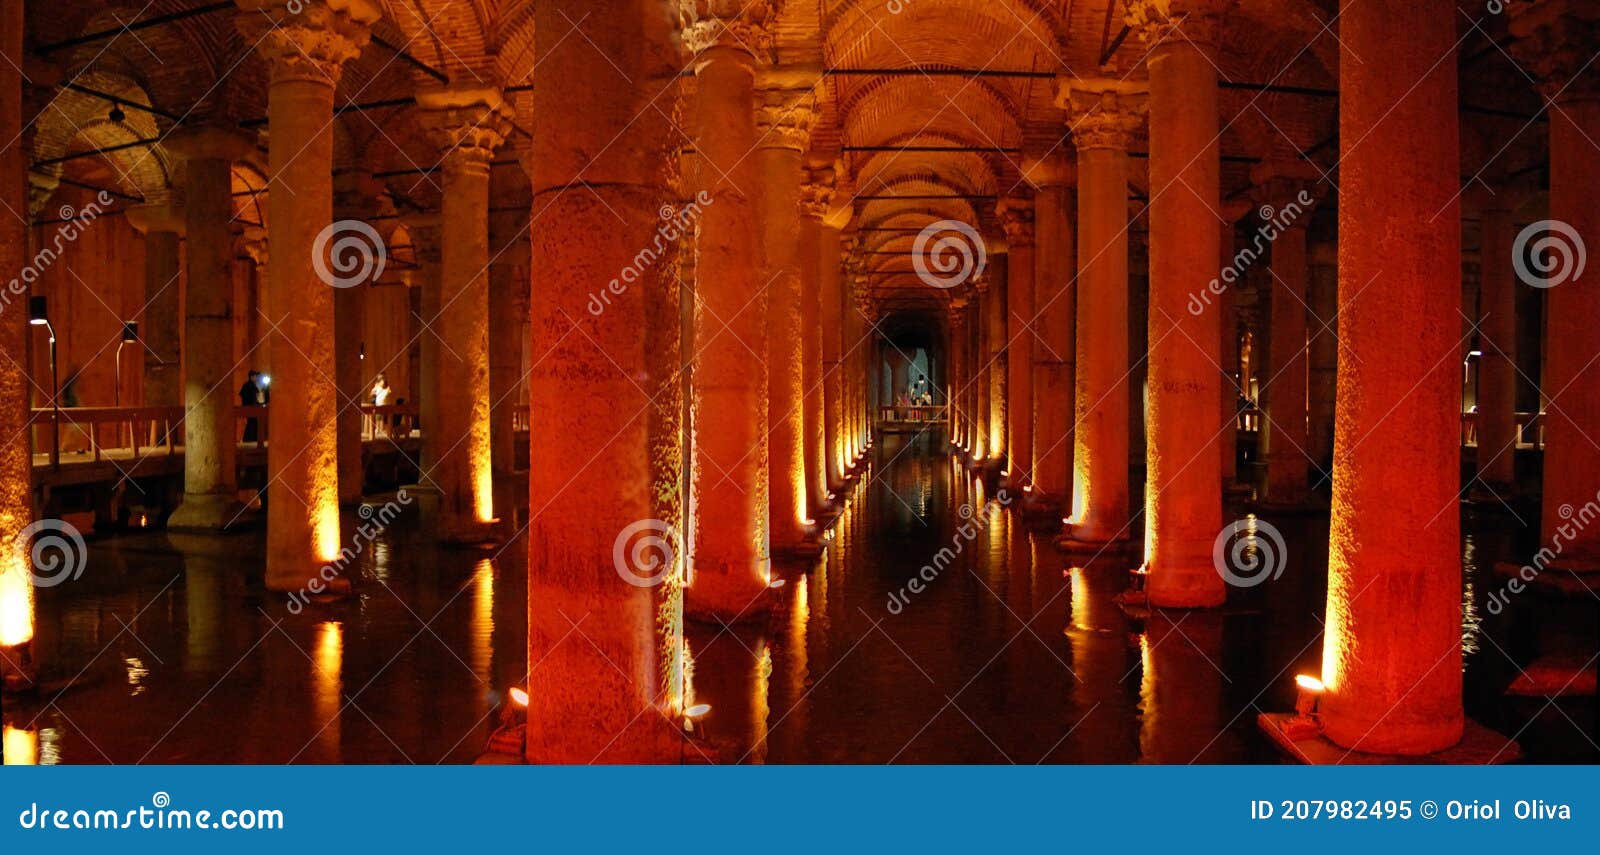 panoramic view of the ancient roman water cisterns  in istanbul (turkey).